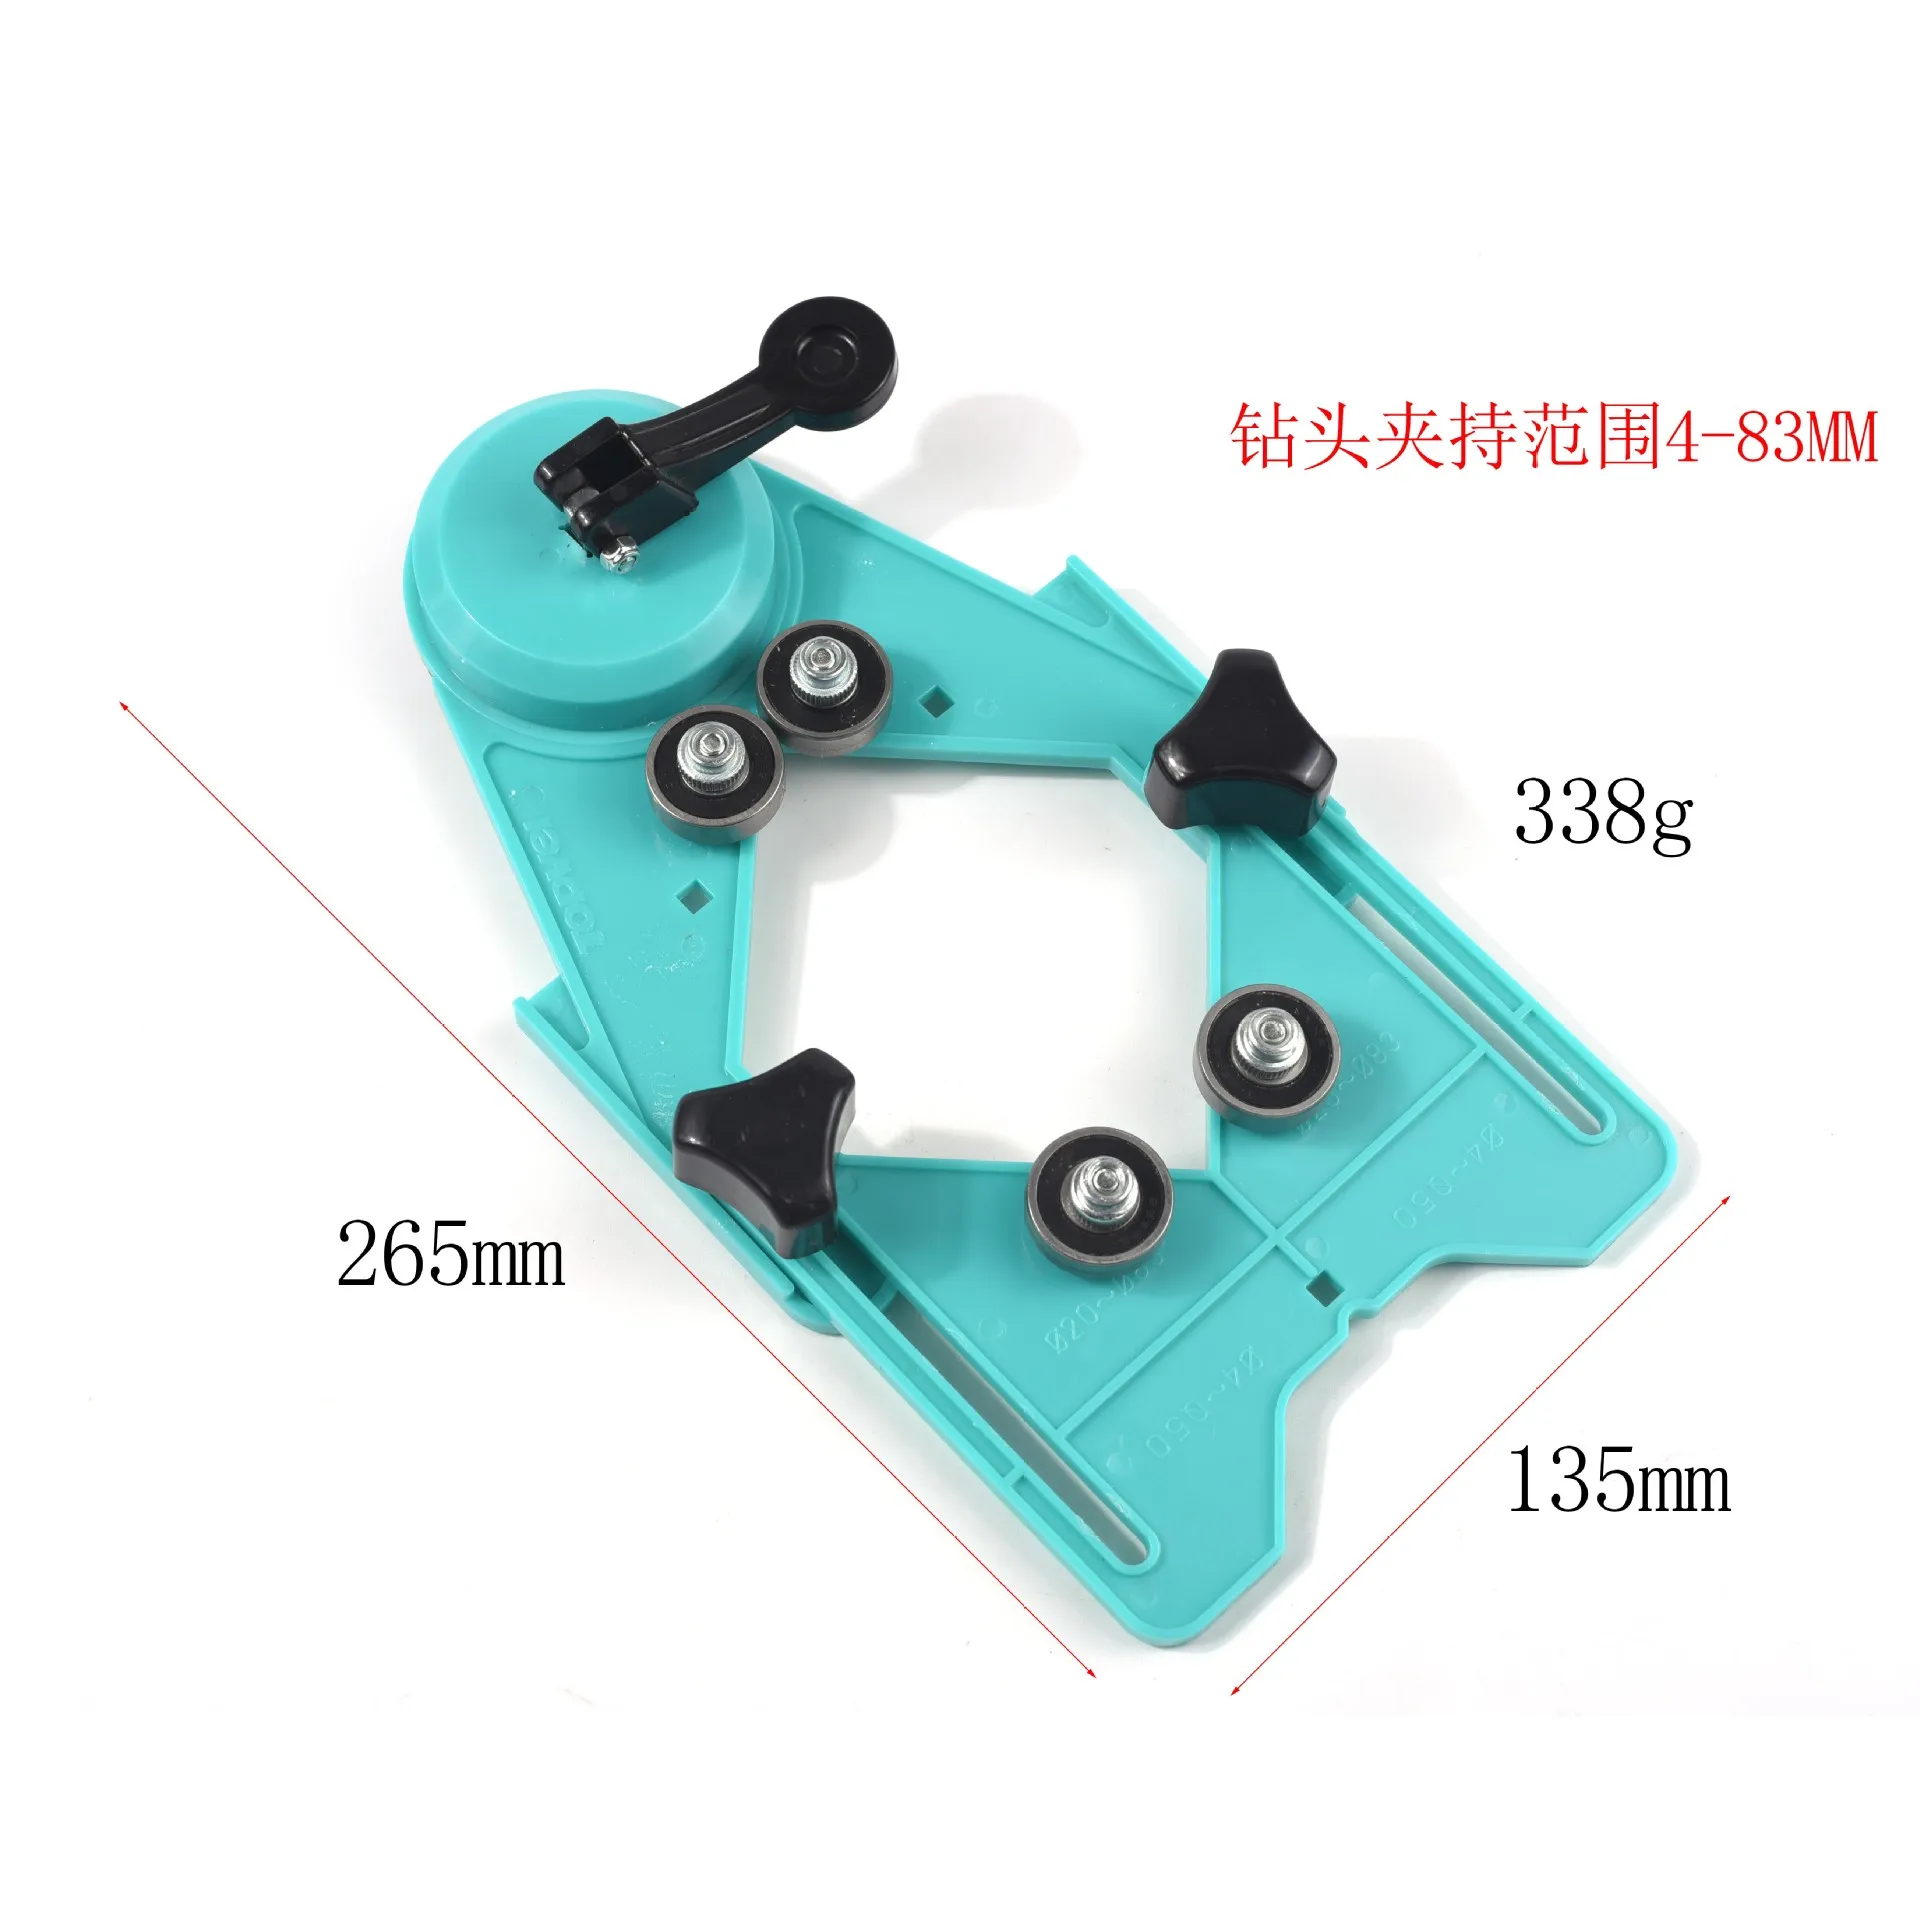 Adjustable Ceramic Tile Glass Hole Saw Cutter Guide Openings Locator 4mm to 83mm 